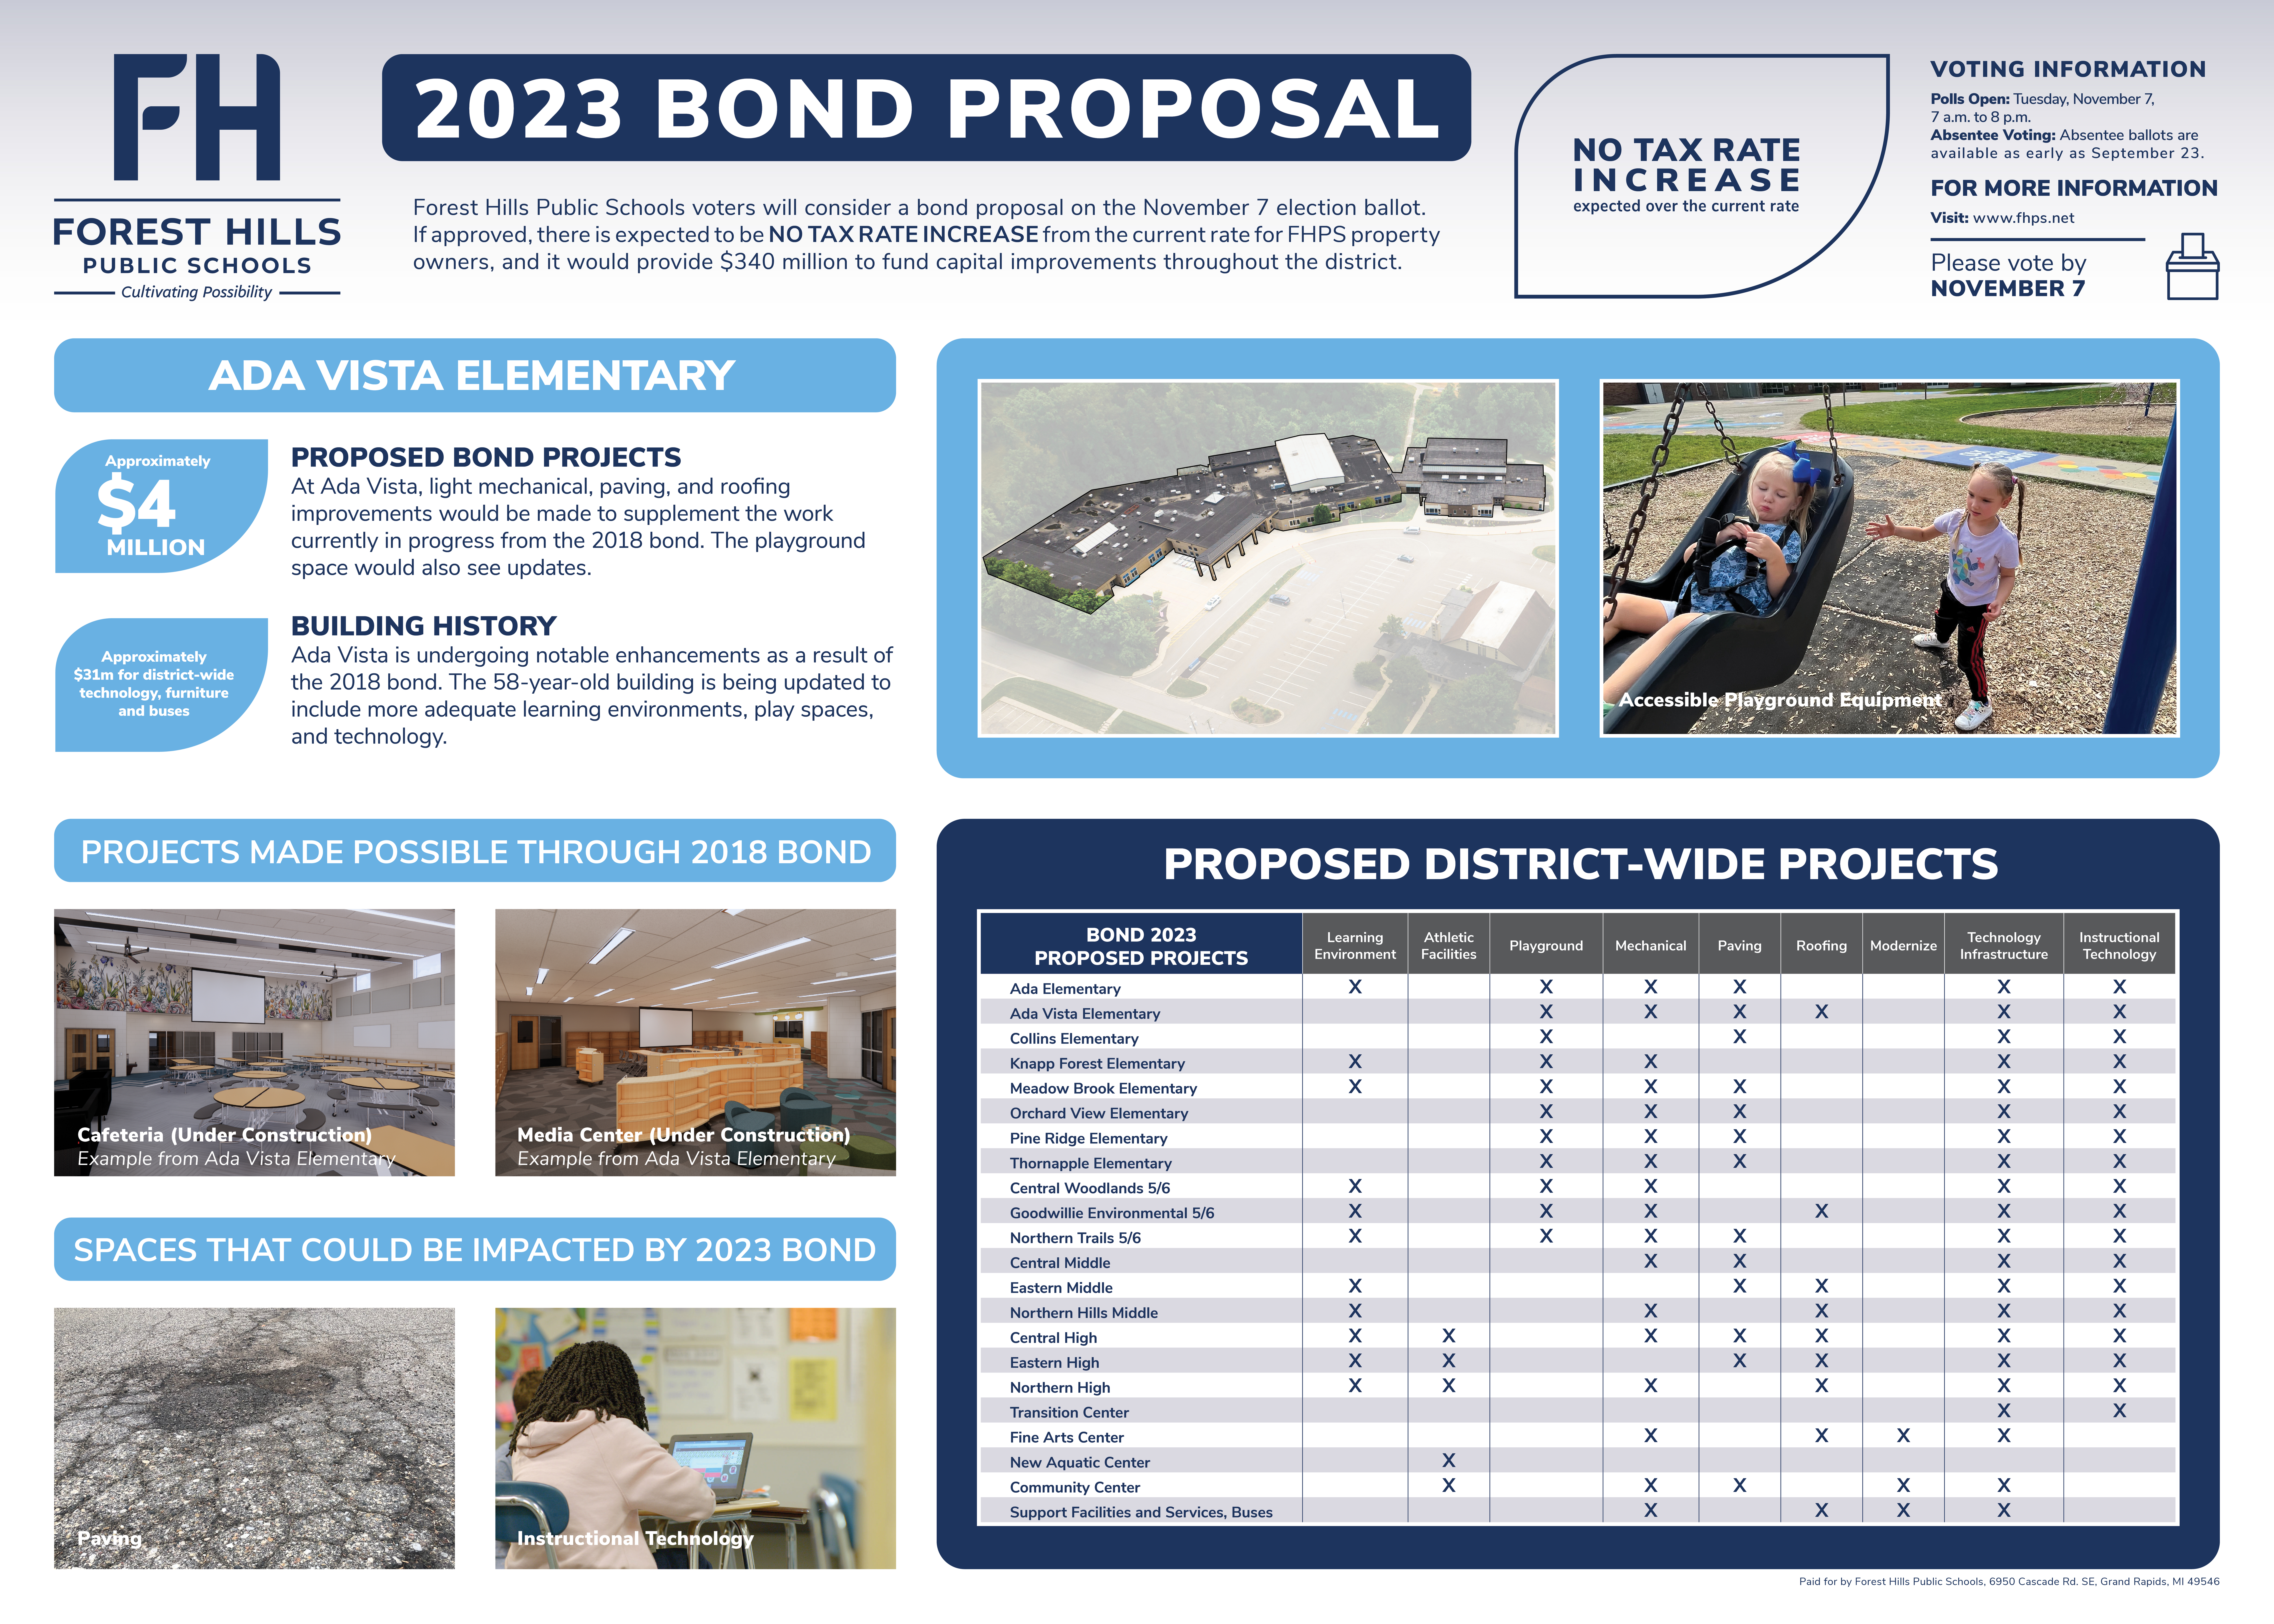 Ada Vista and pictures of the existing building and bond project pictures from 2018 and spaces that could be impacted by the 2023 bond.